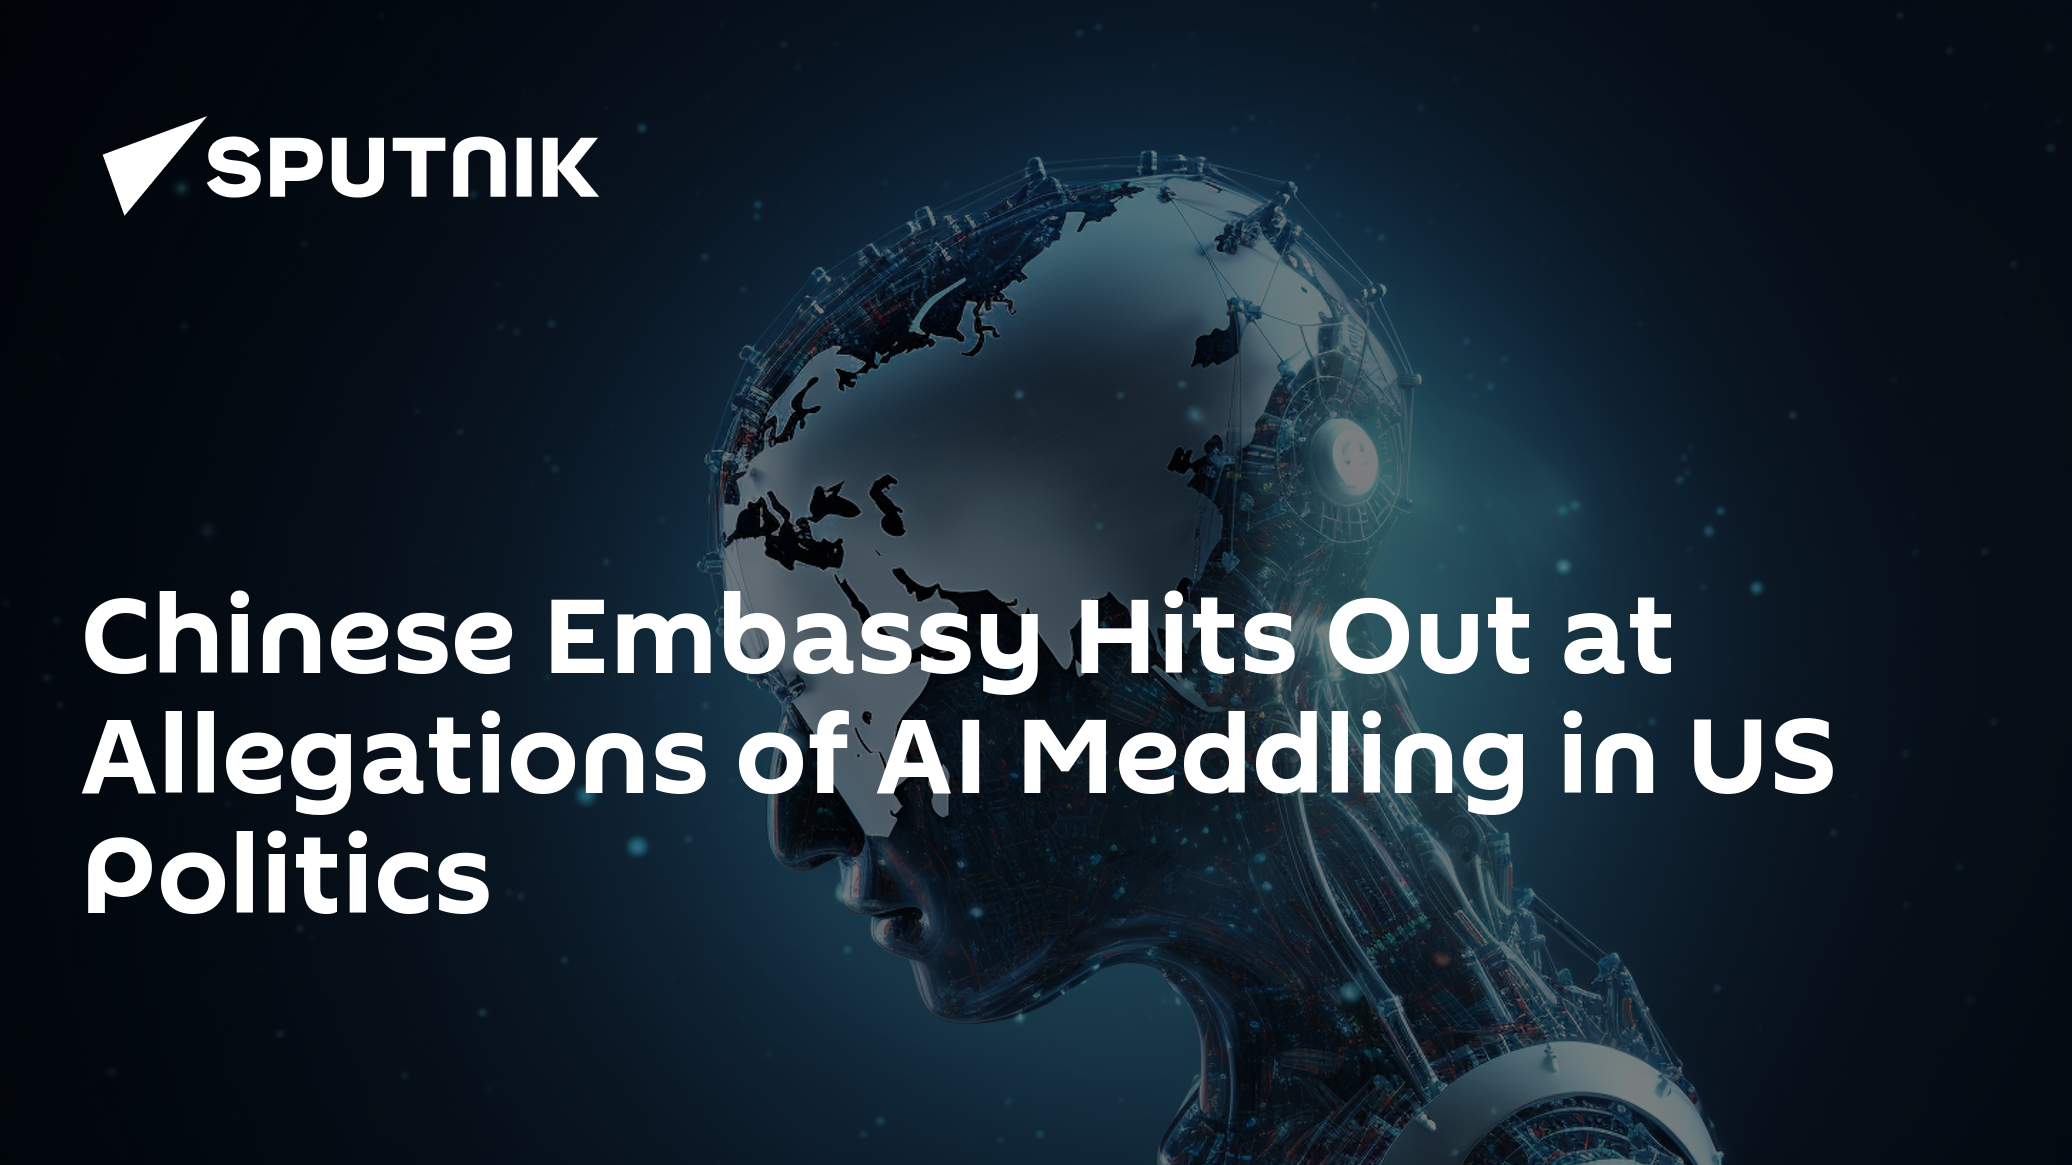 Chinese Embassy Hits Out at Allegations of AI Meddling in US Politics